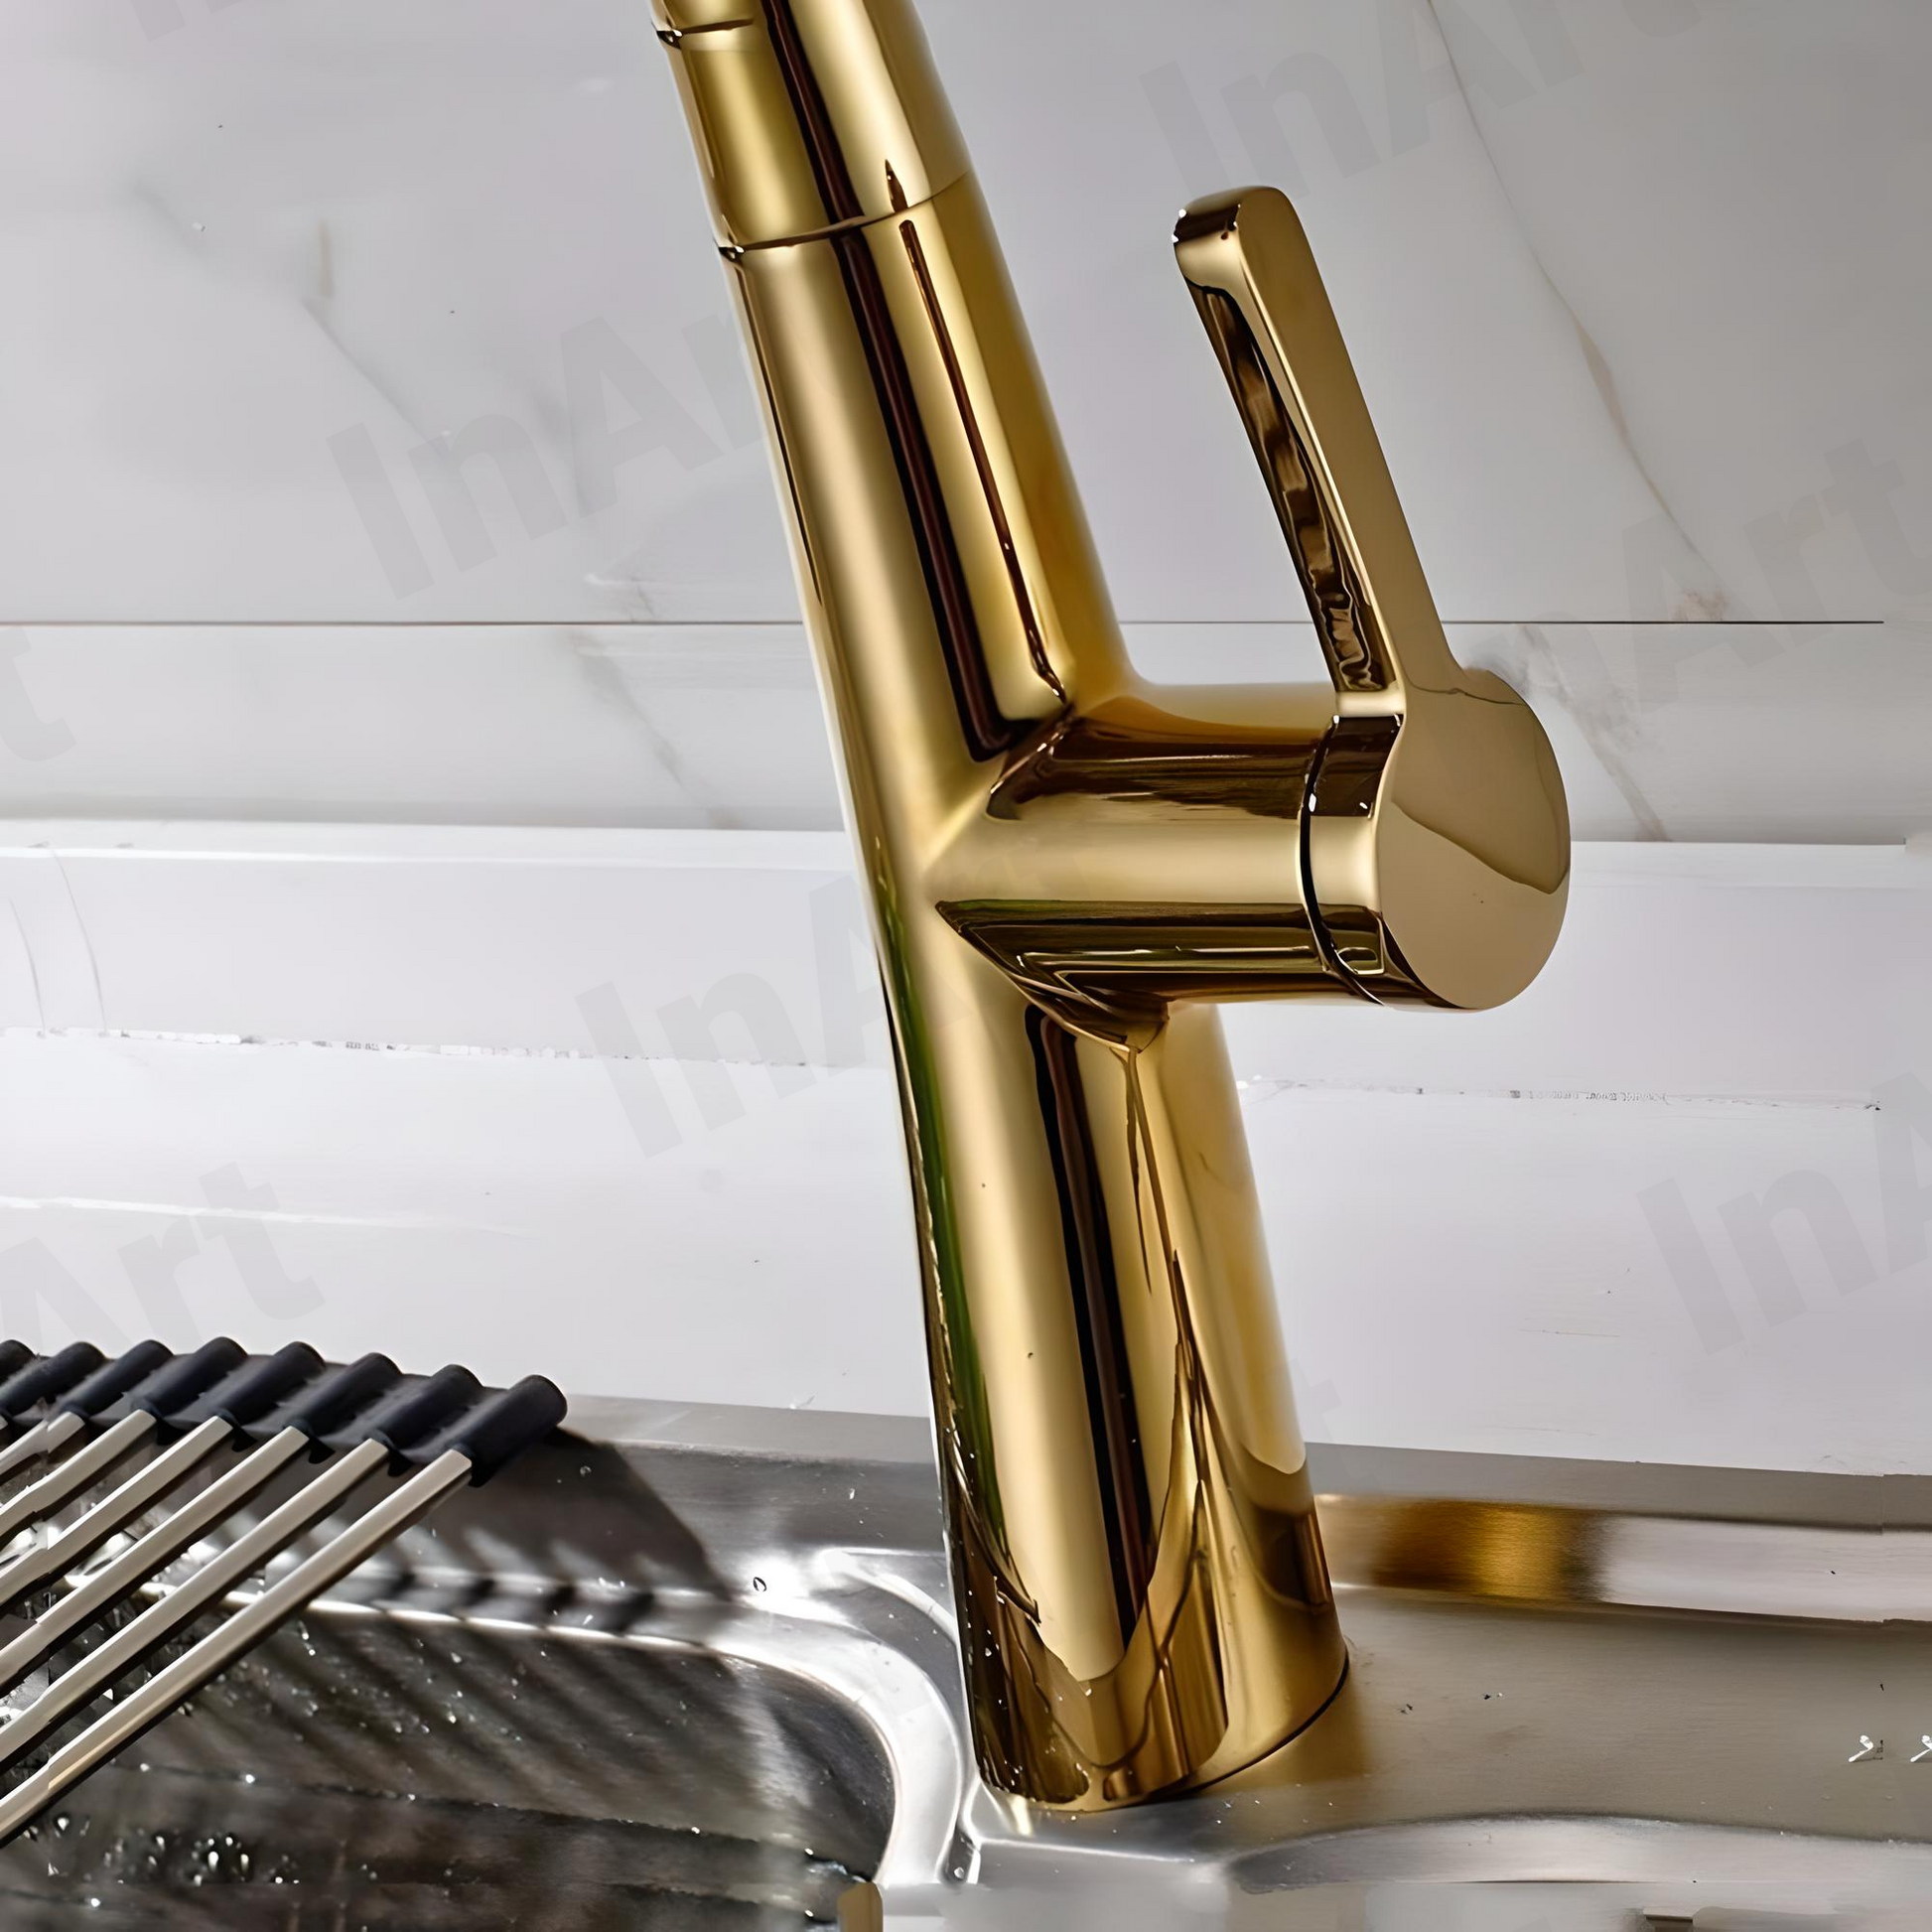 InArt Gold Stainless Steel Kitchen Sink Mixer with 360° Swivel and Pull-Down Spray - Elegant Single Lever Faucet - InArt-Studio